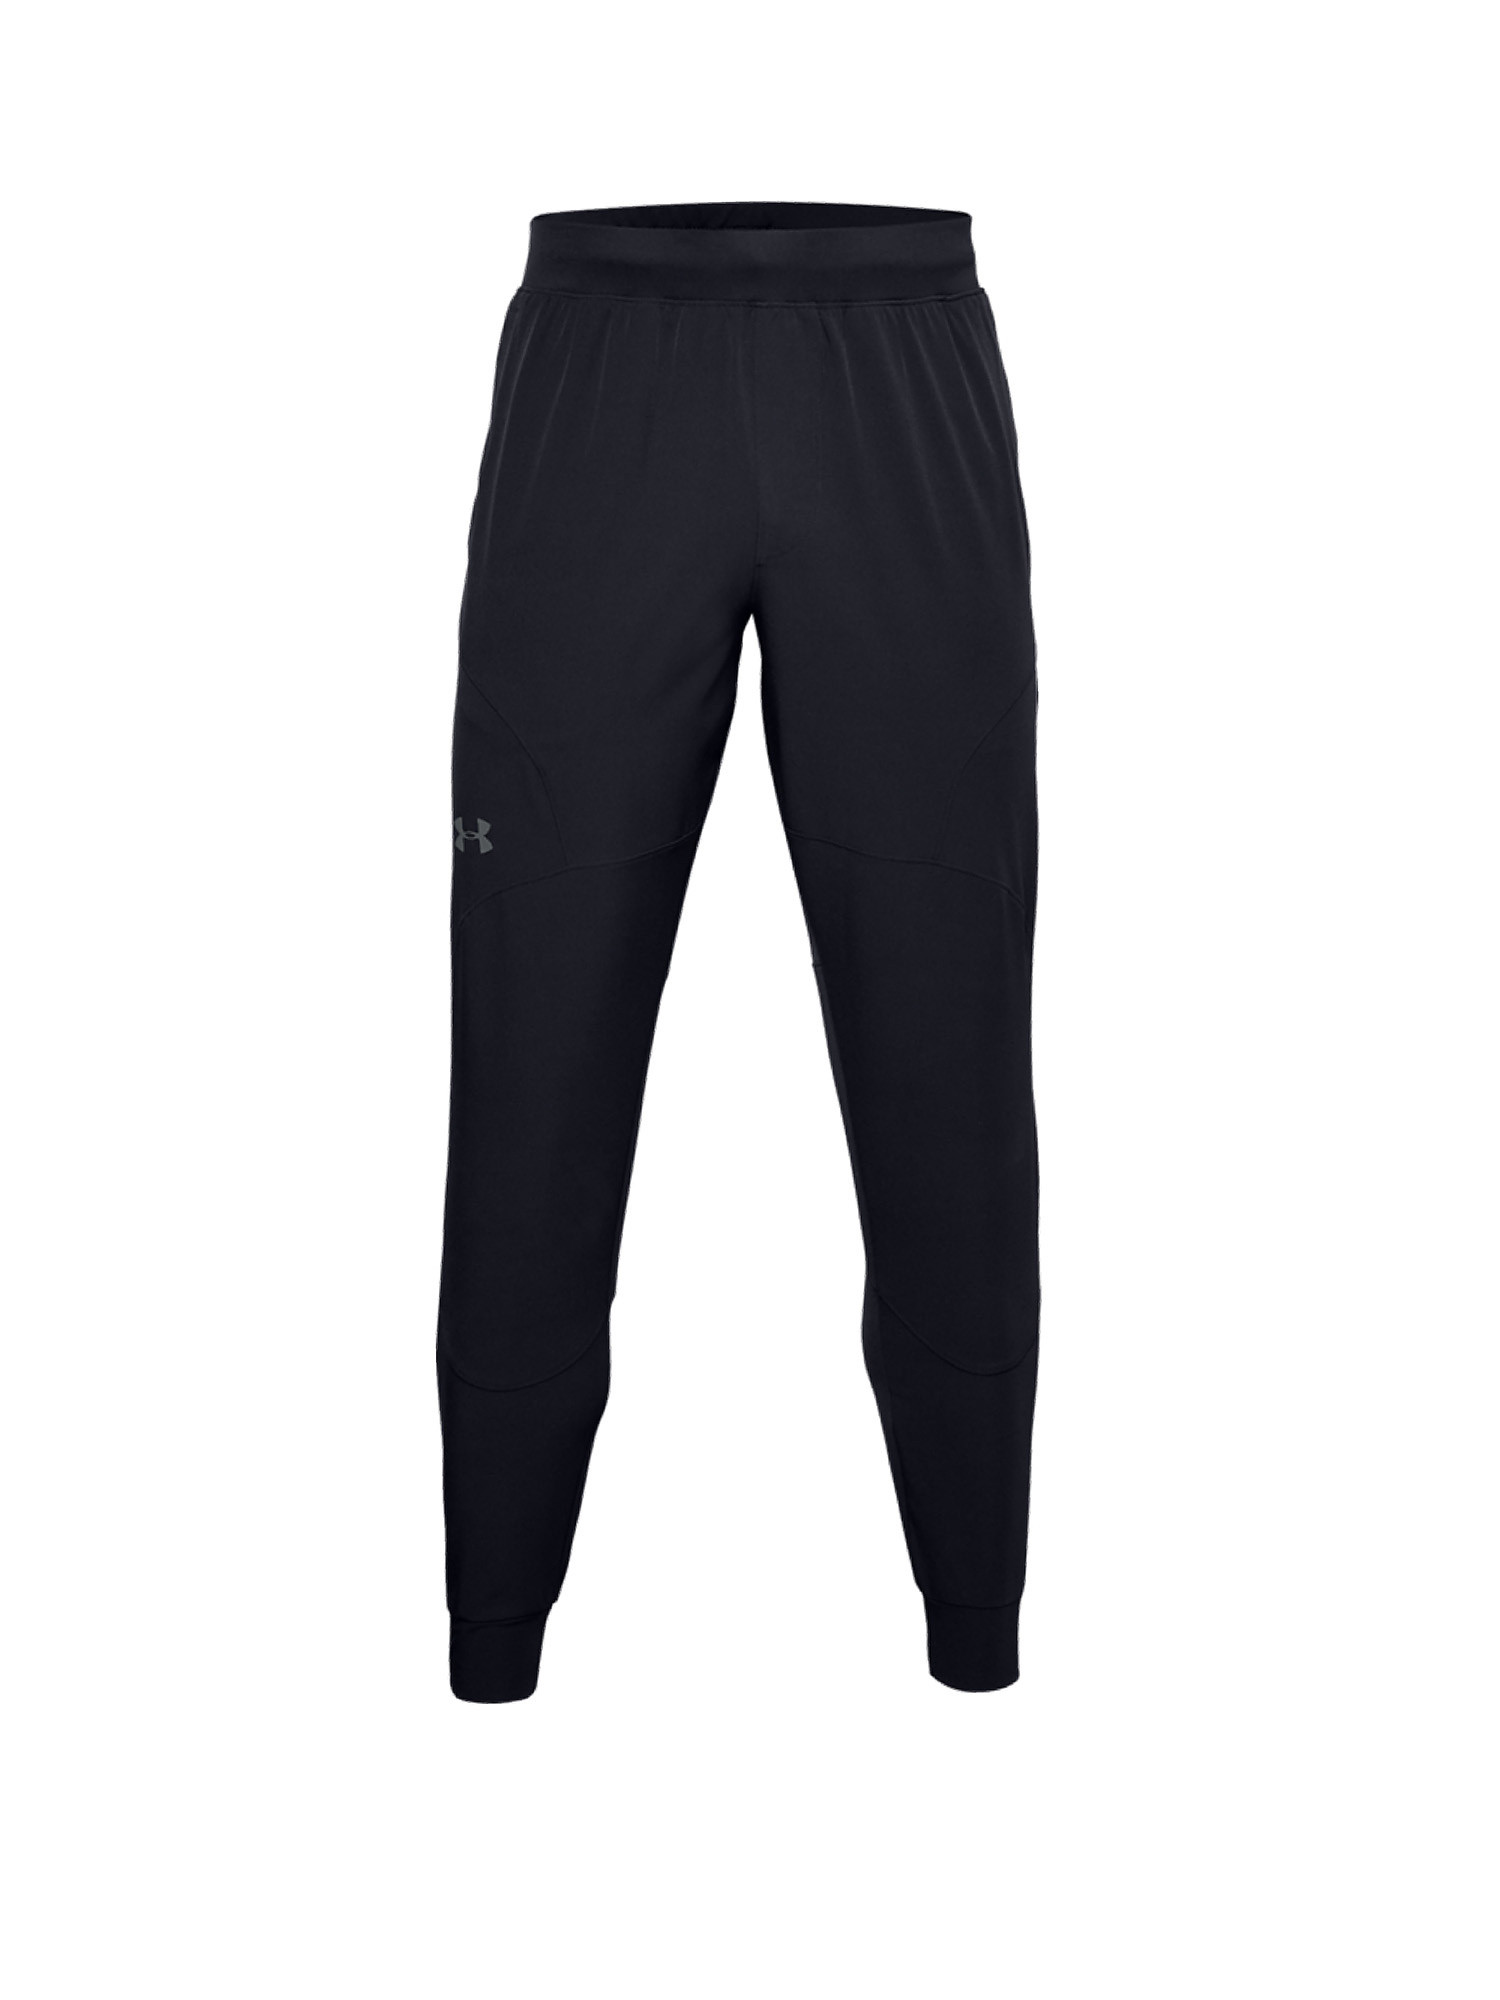 Under Armour - Joggers UA Unstoppable, Black, large image number 0